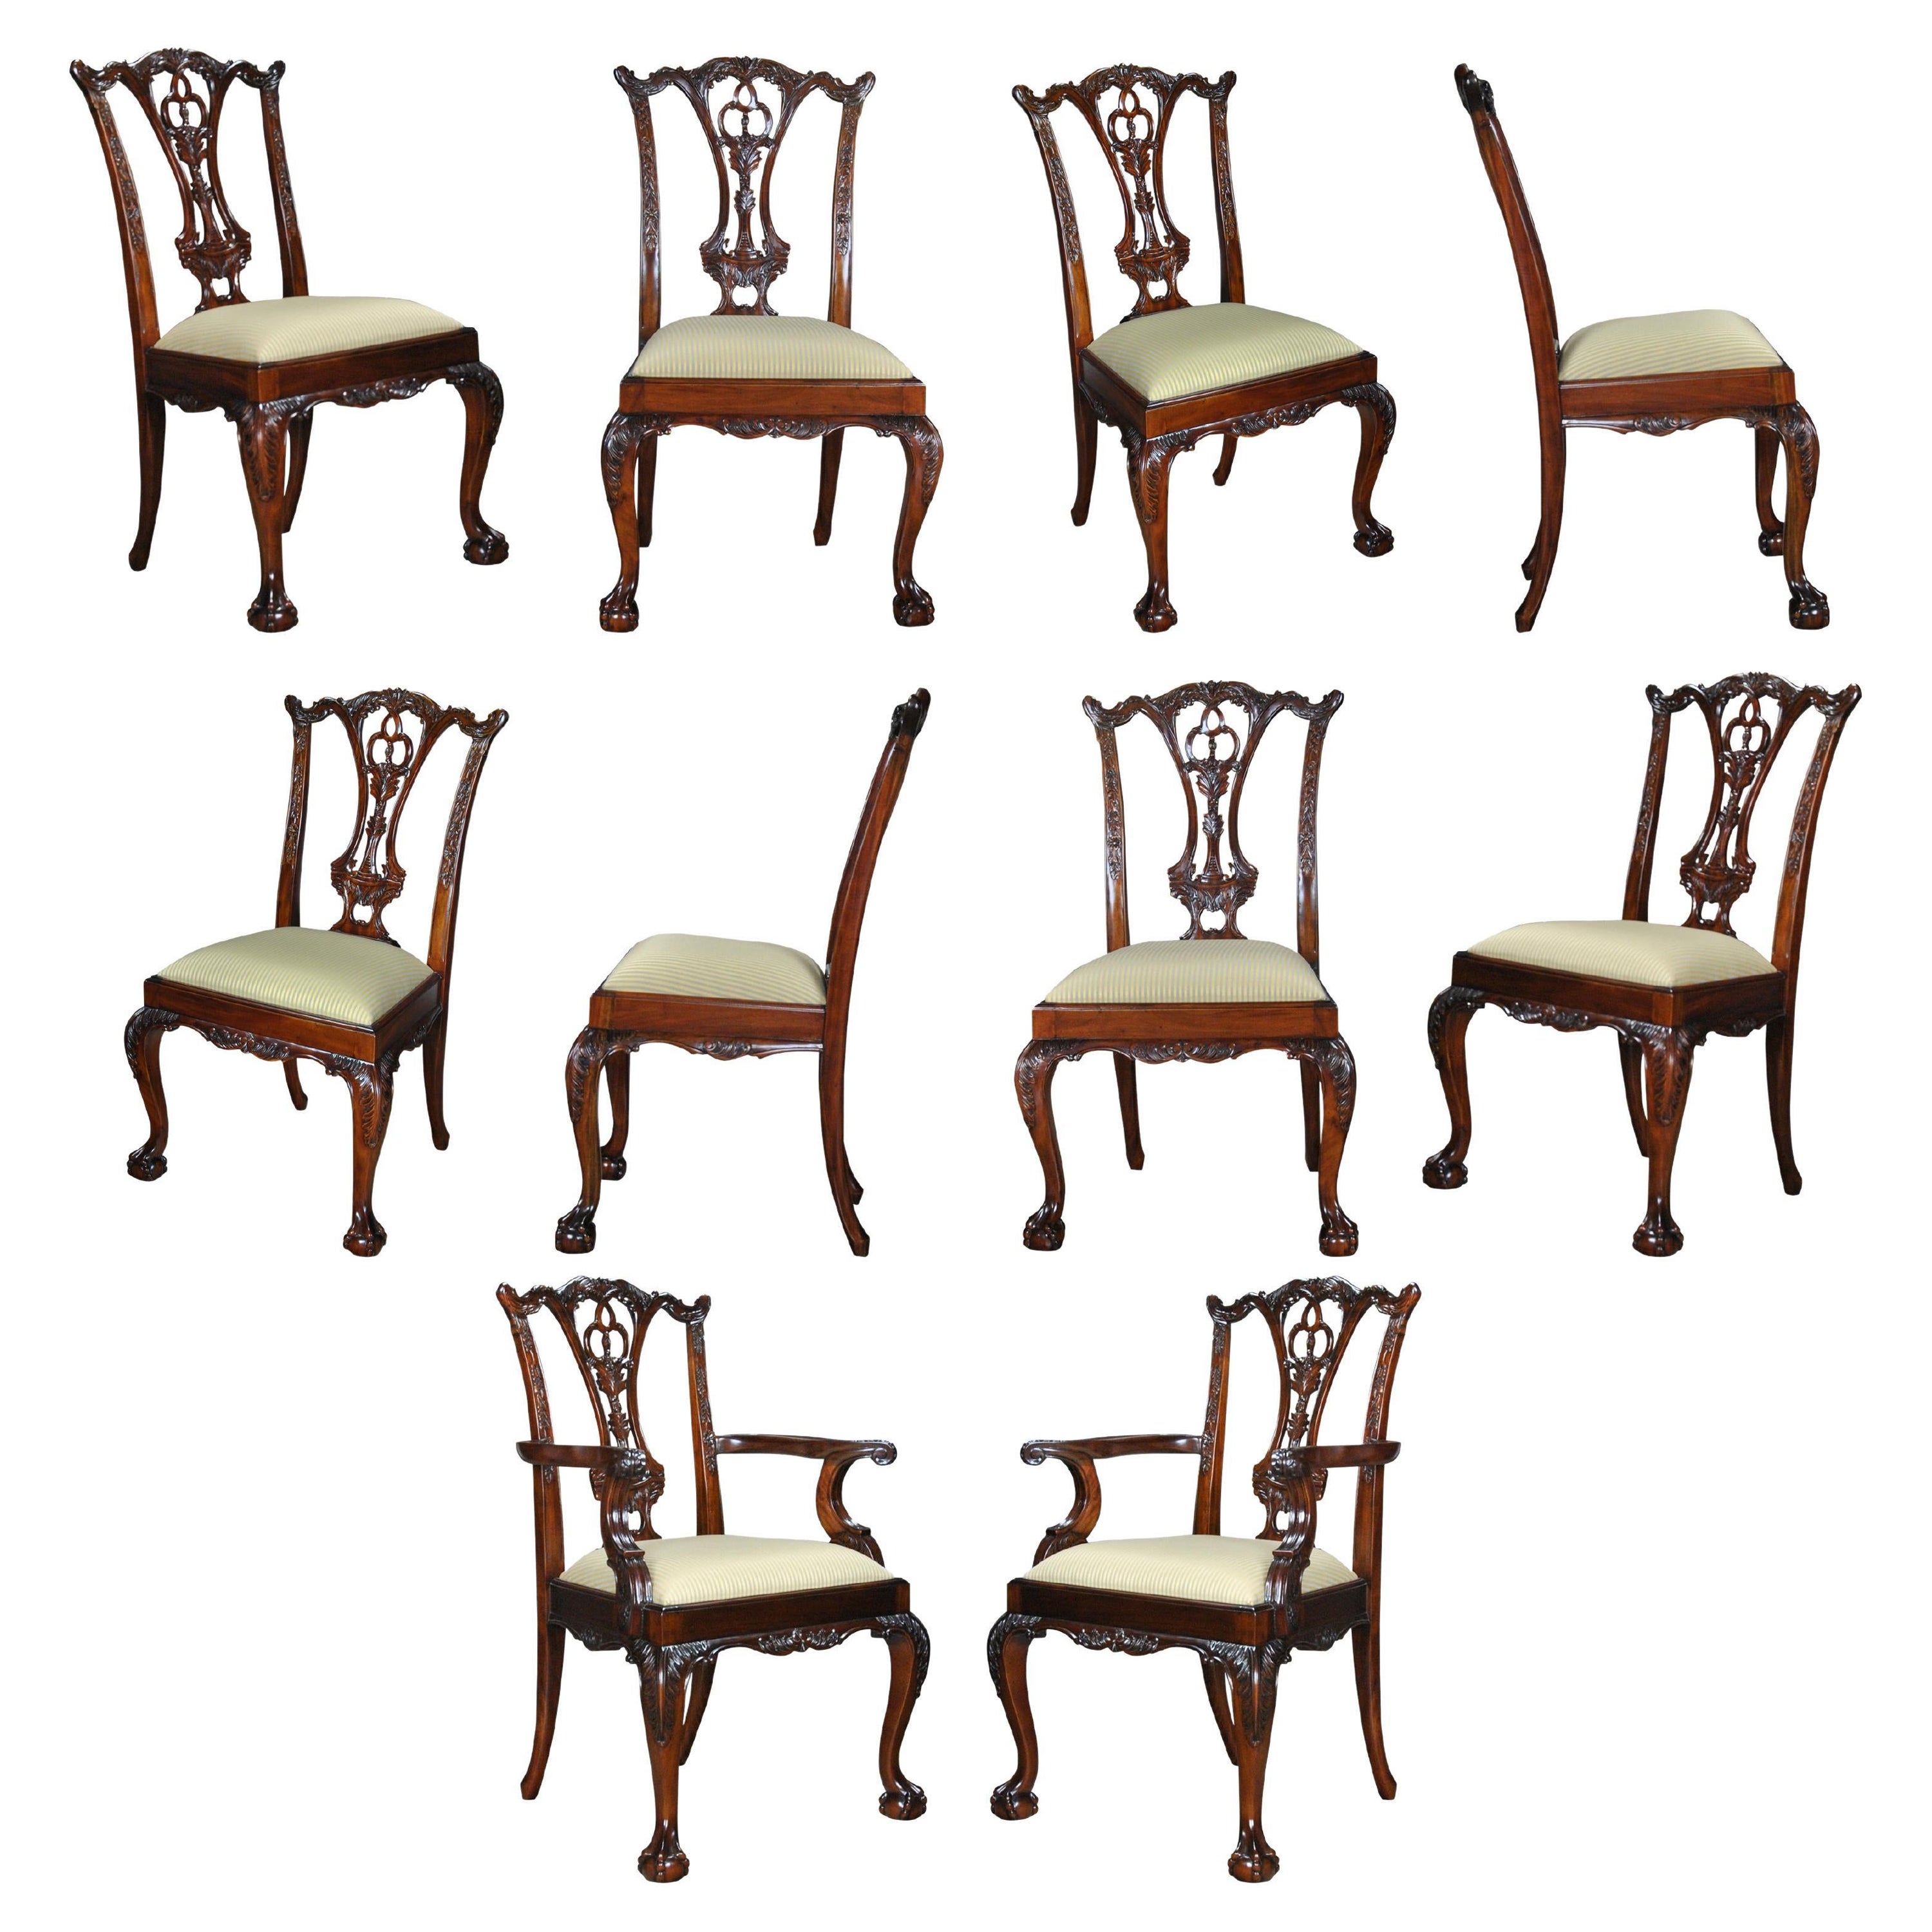 Standard Chippendale Chairs, Set of Ten For Sale